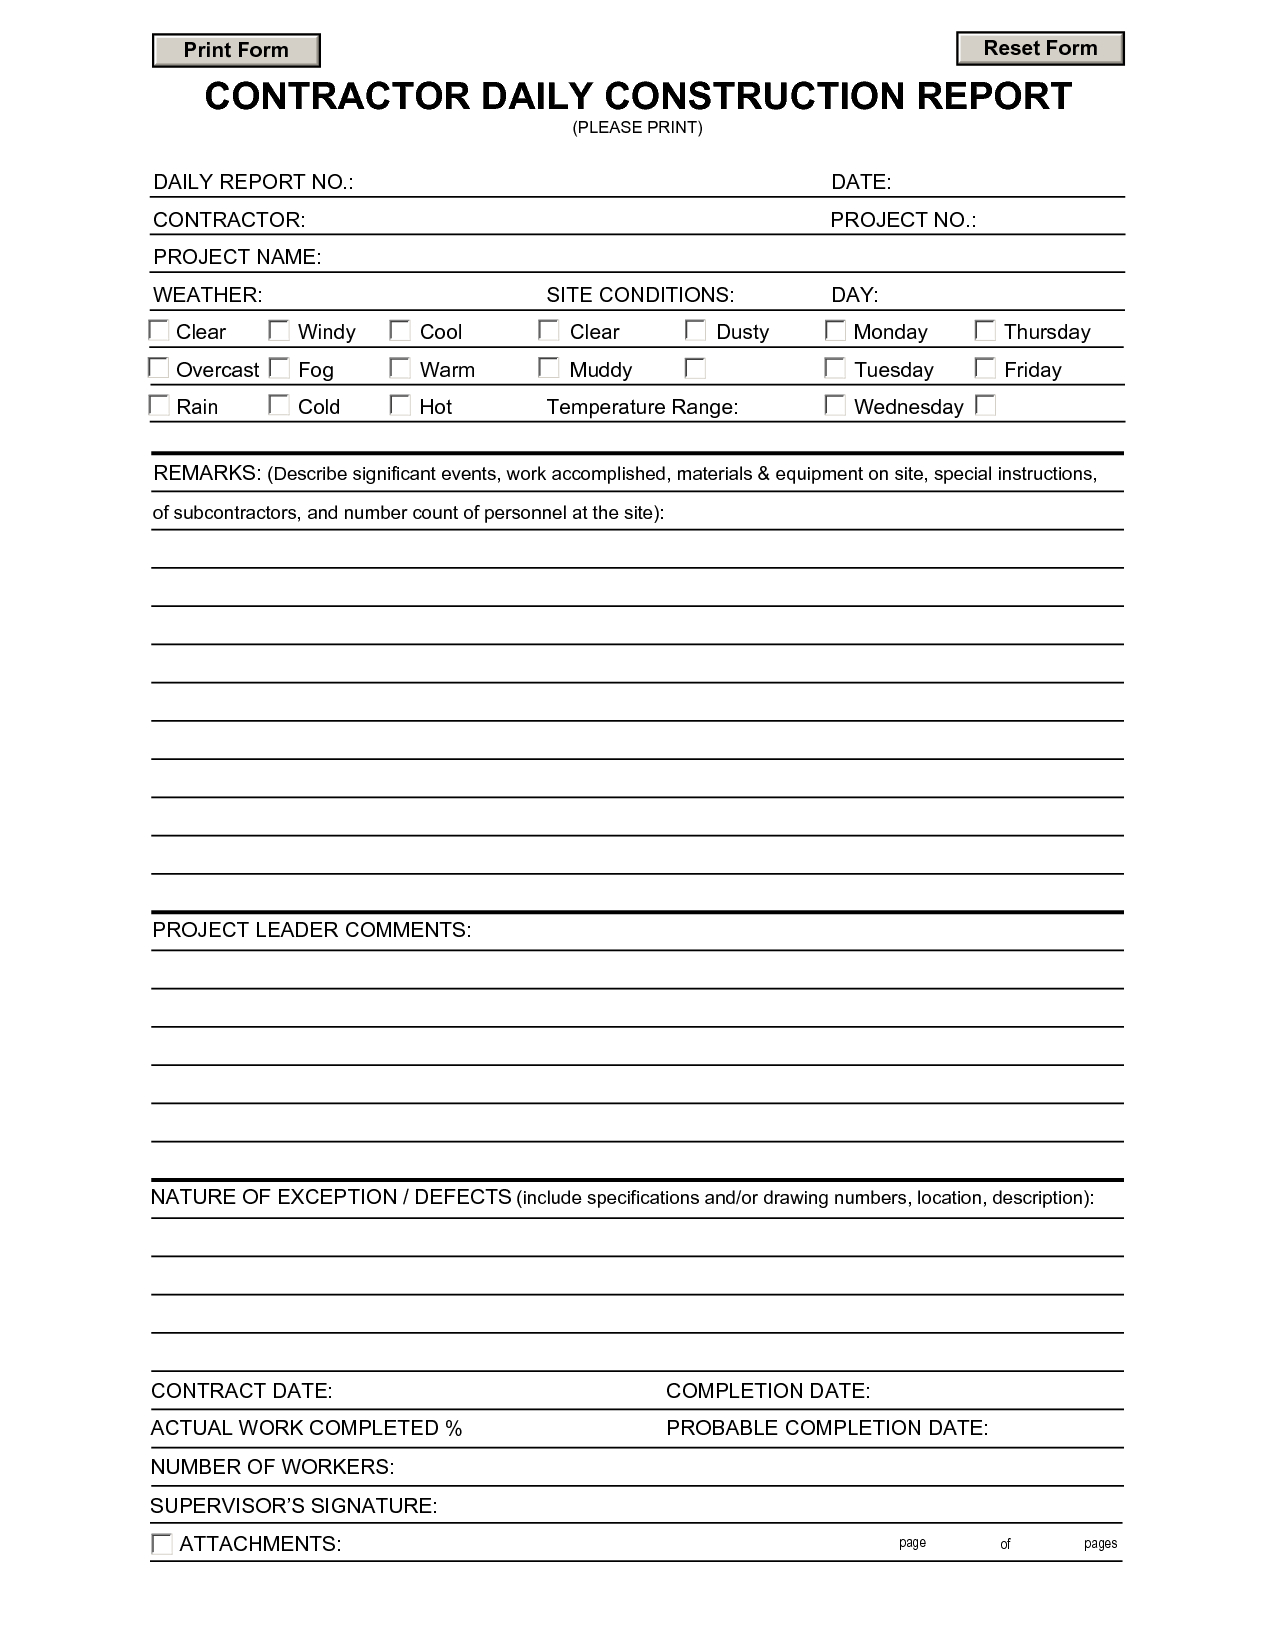 Construction Daily Report Template | Contractors | Report Within Construction Daily Progress Report Template